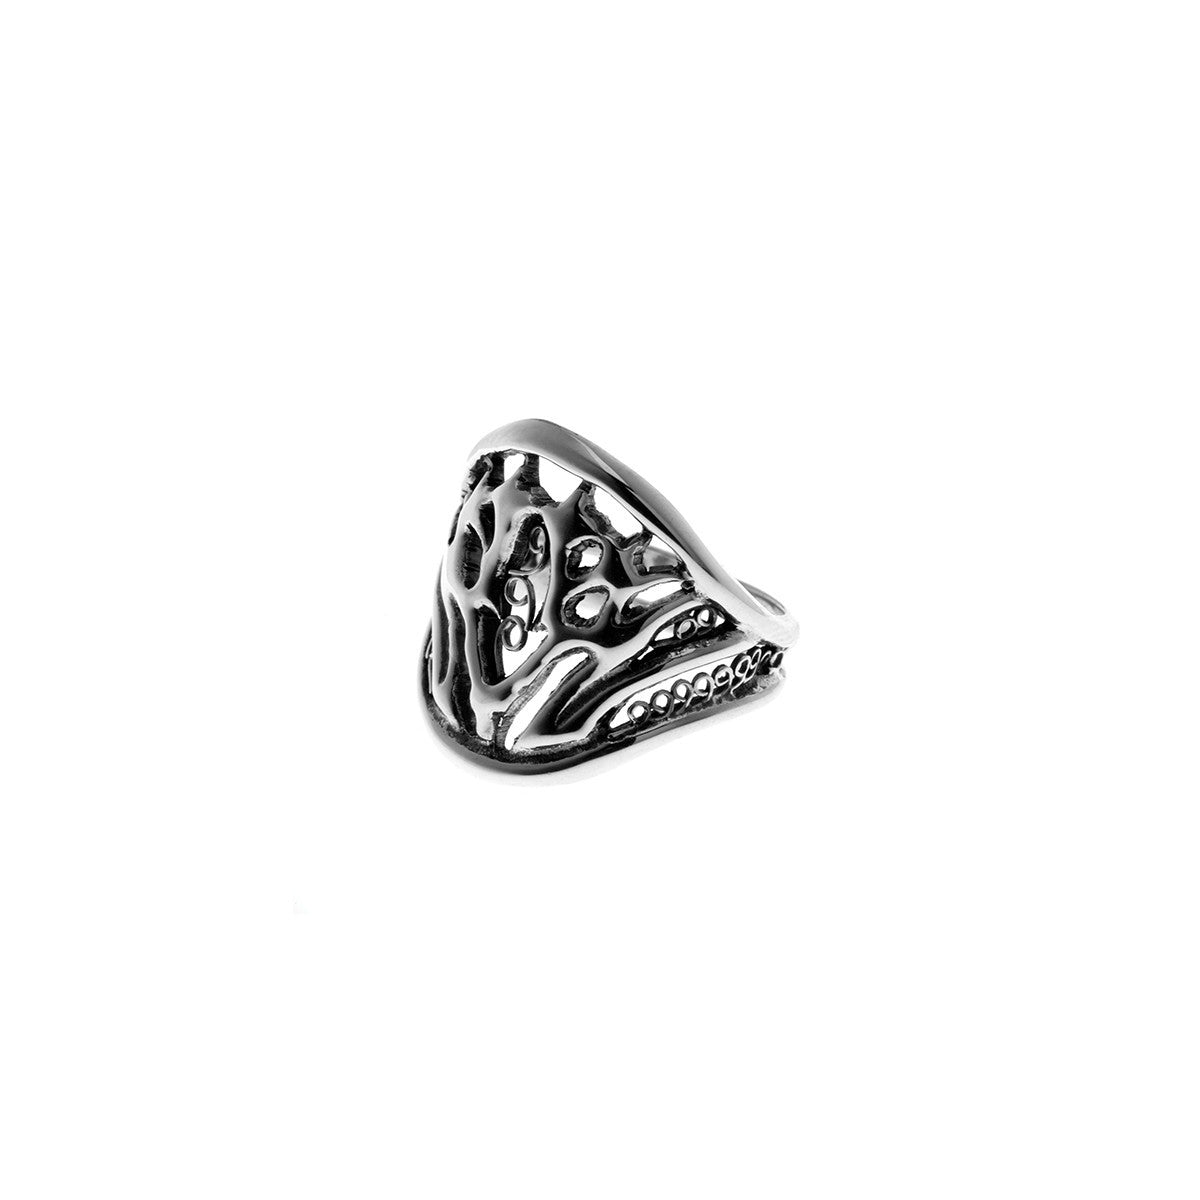 Belle Nouveau Grasset Sterling Silver Ring - Cynthia Gale New York Jewelry